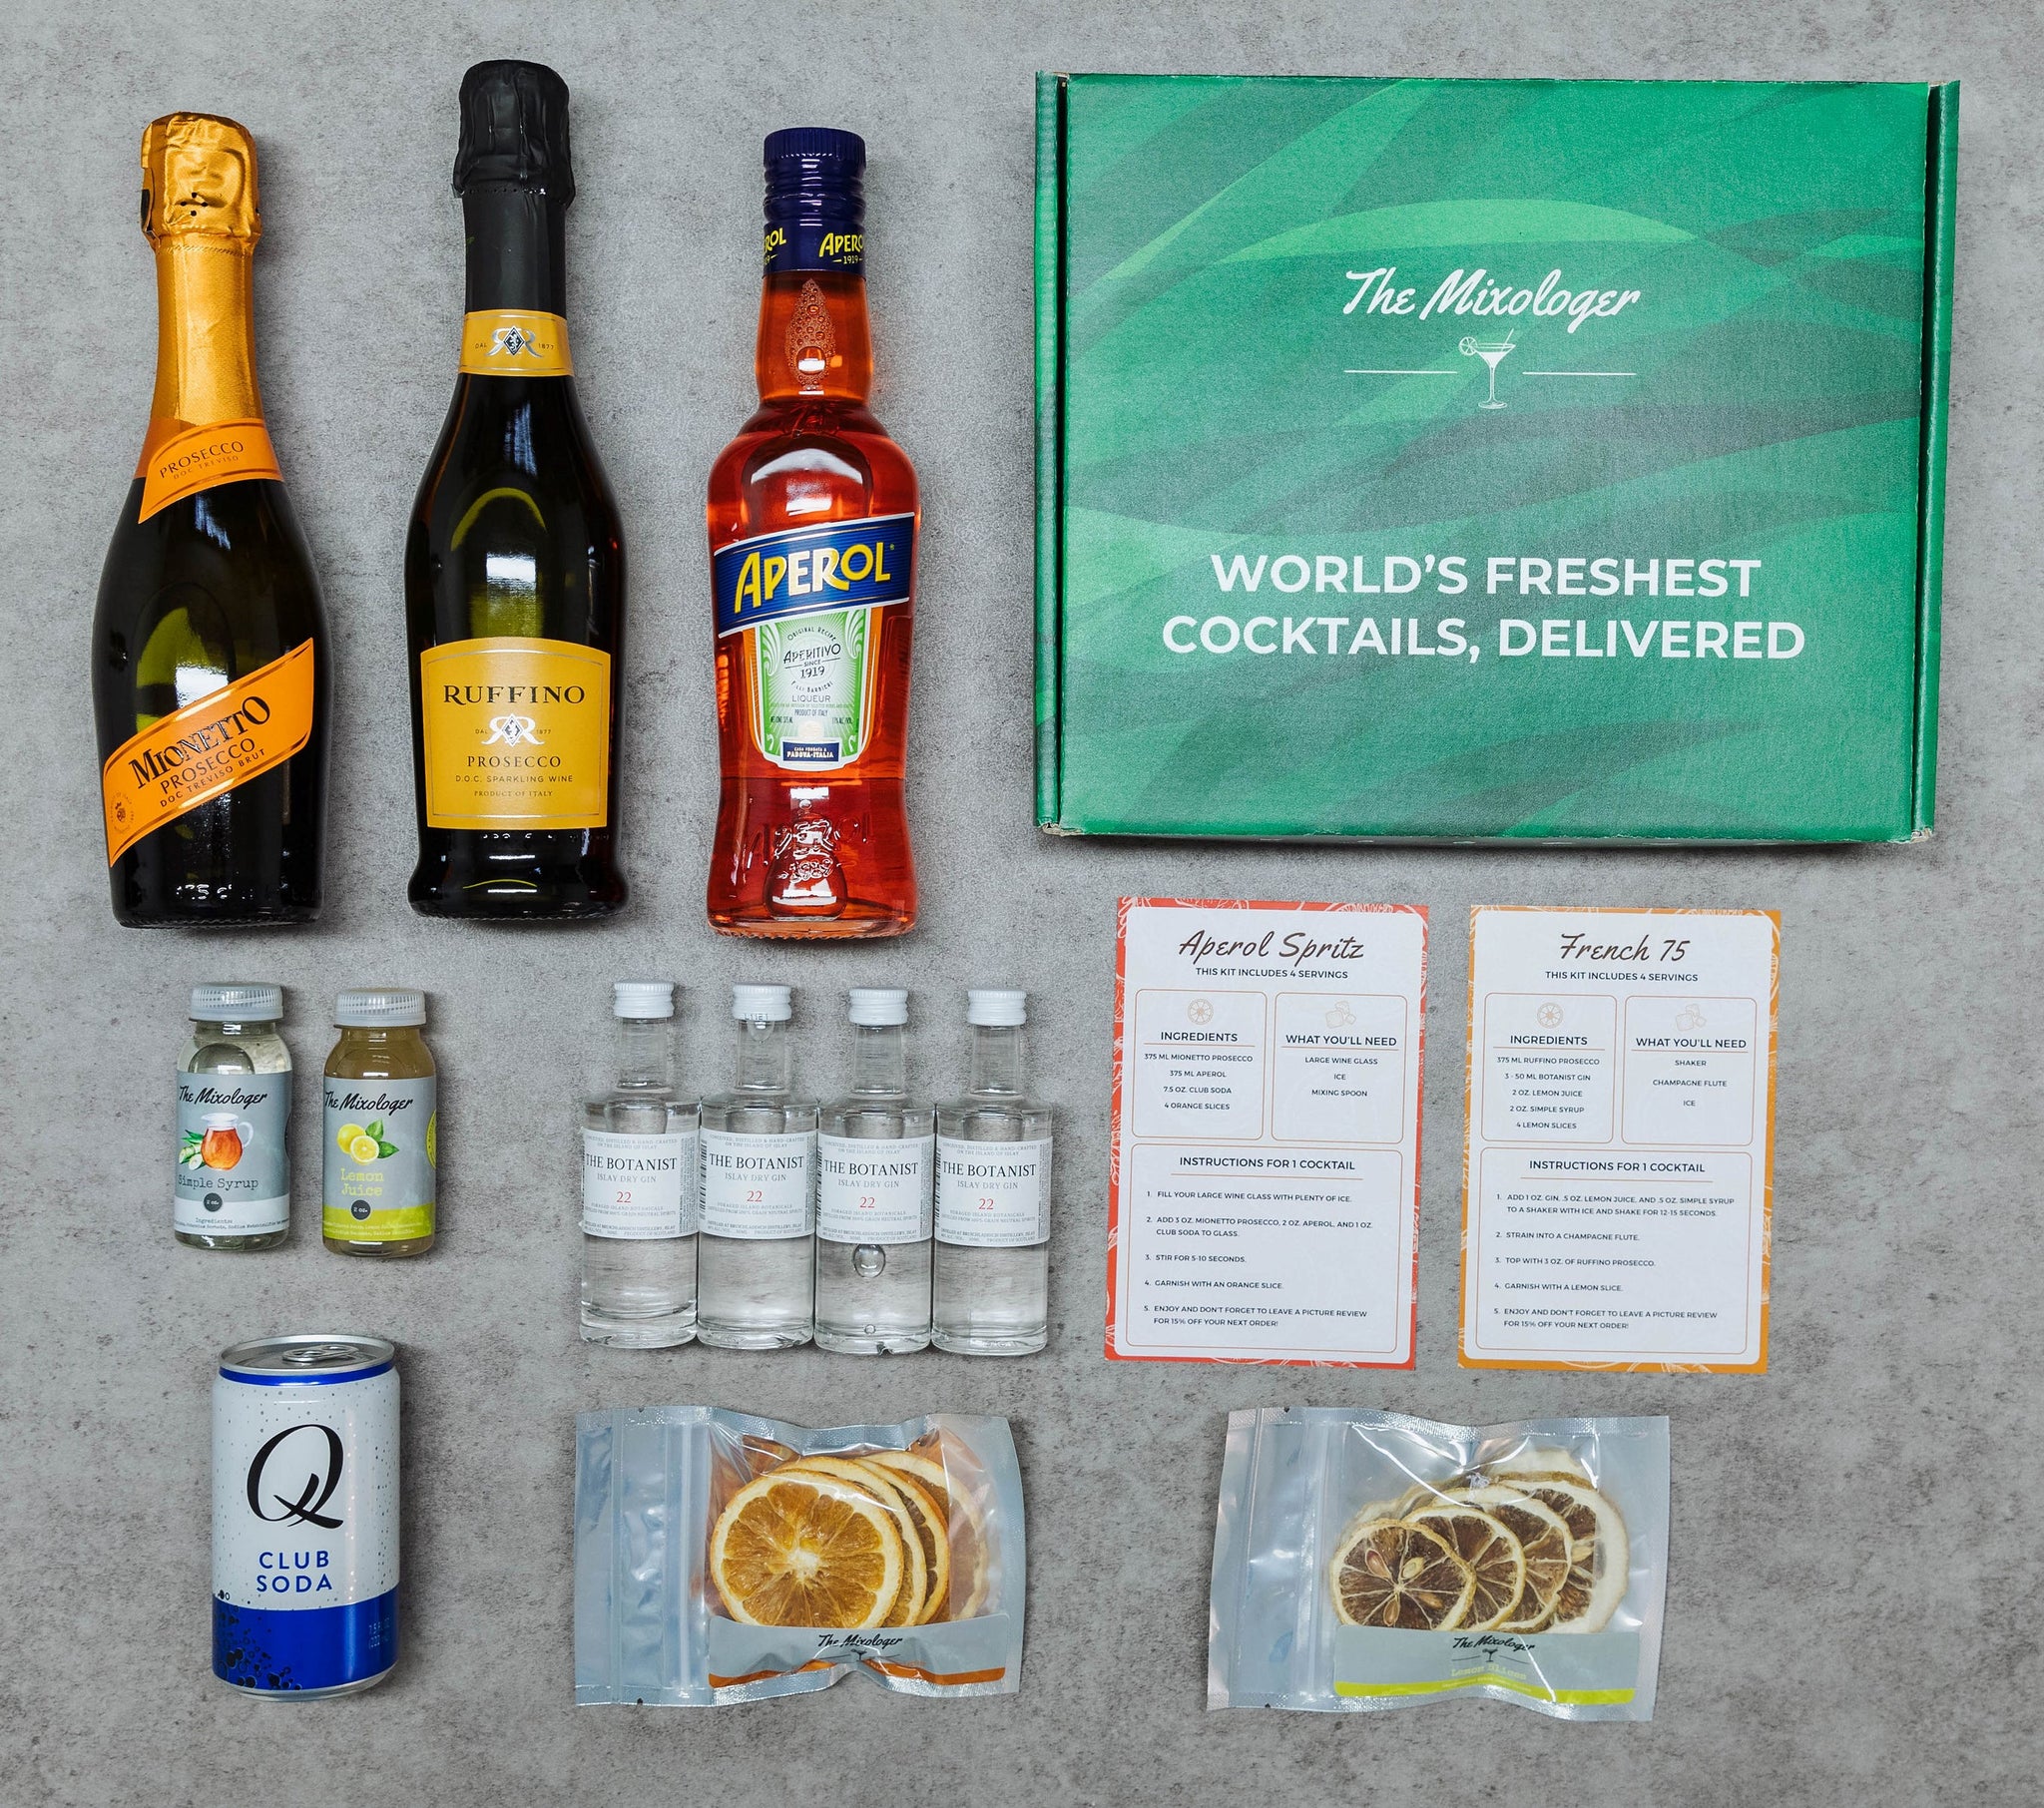 Box 75 & Spritz Aperol – French Mixologer The